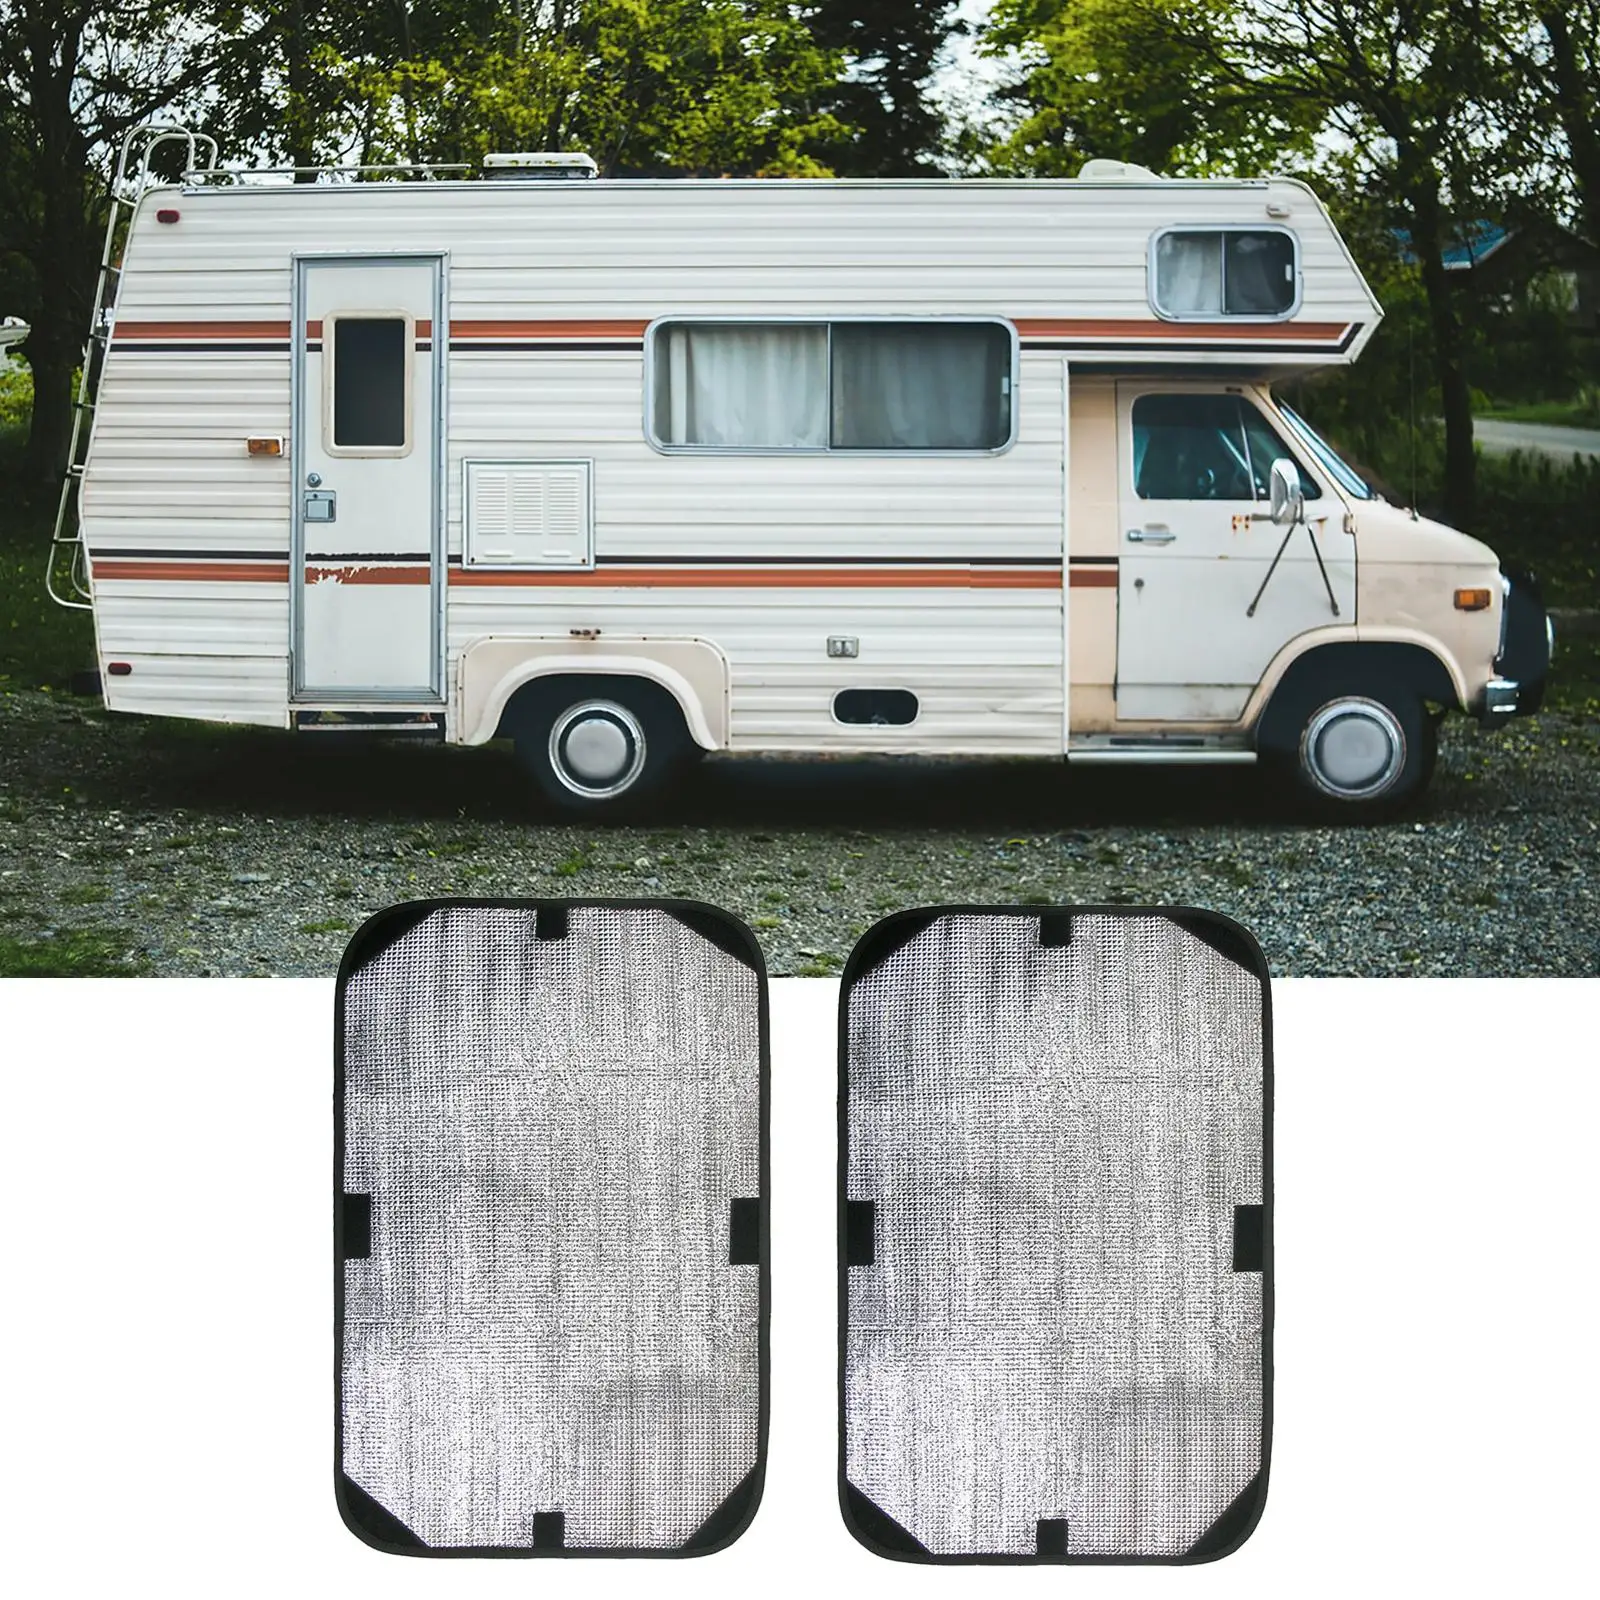 RV Door Window Shade Cover 15.94x24.41inch Waterproof Double-Layer Sun Shade Fit for Camper